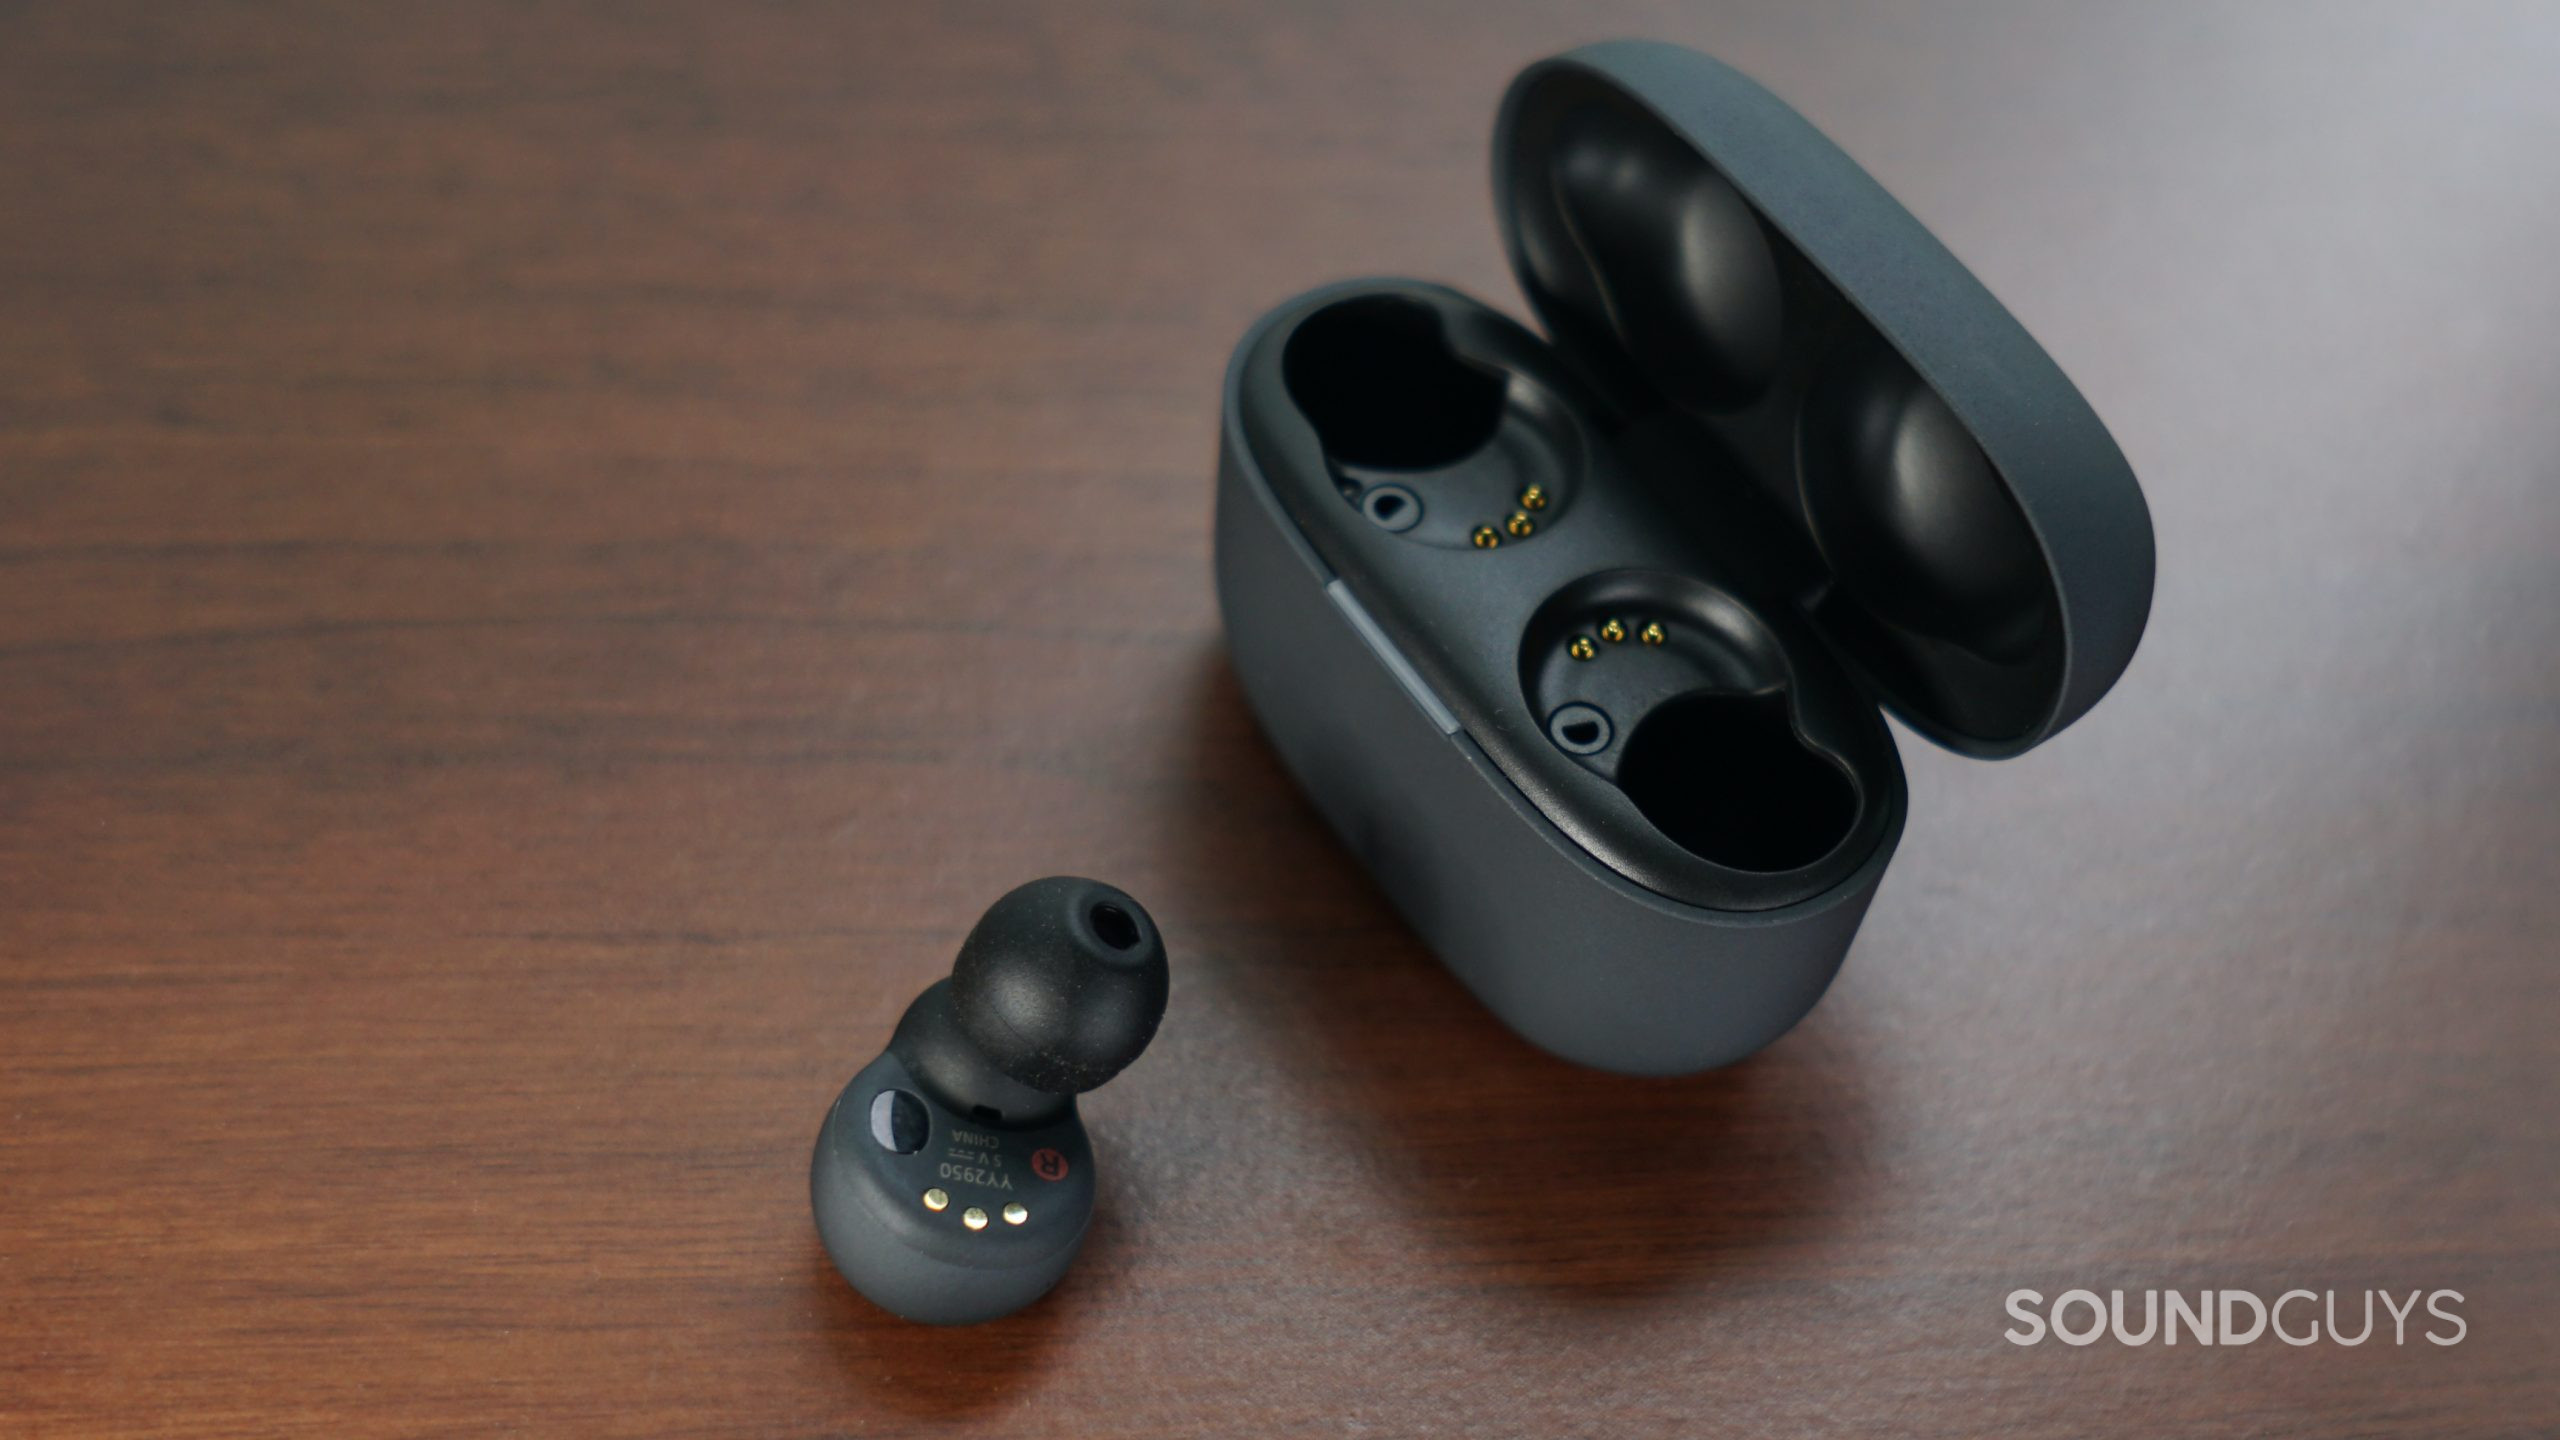 The Sony LinkBuds S lays on a wooden surface next to its open charging case.